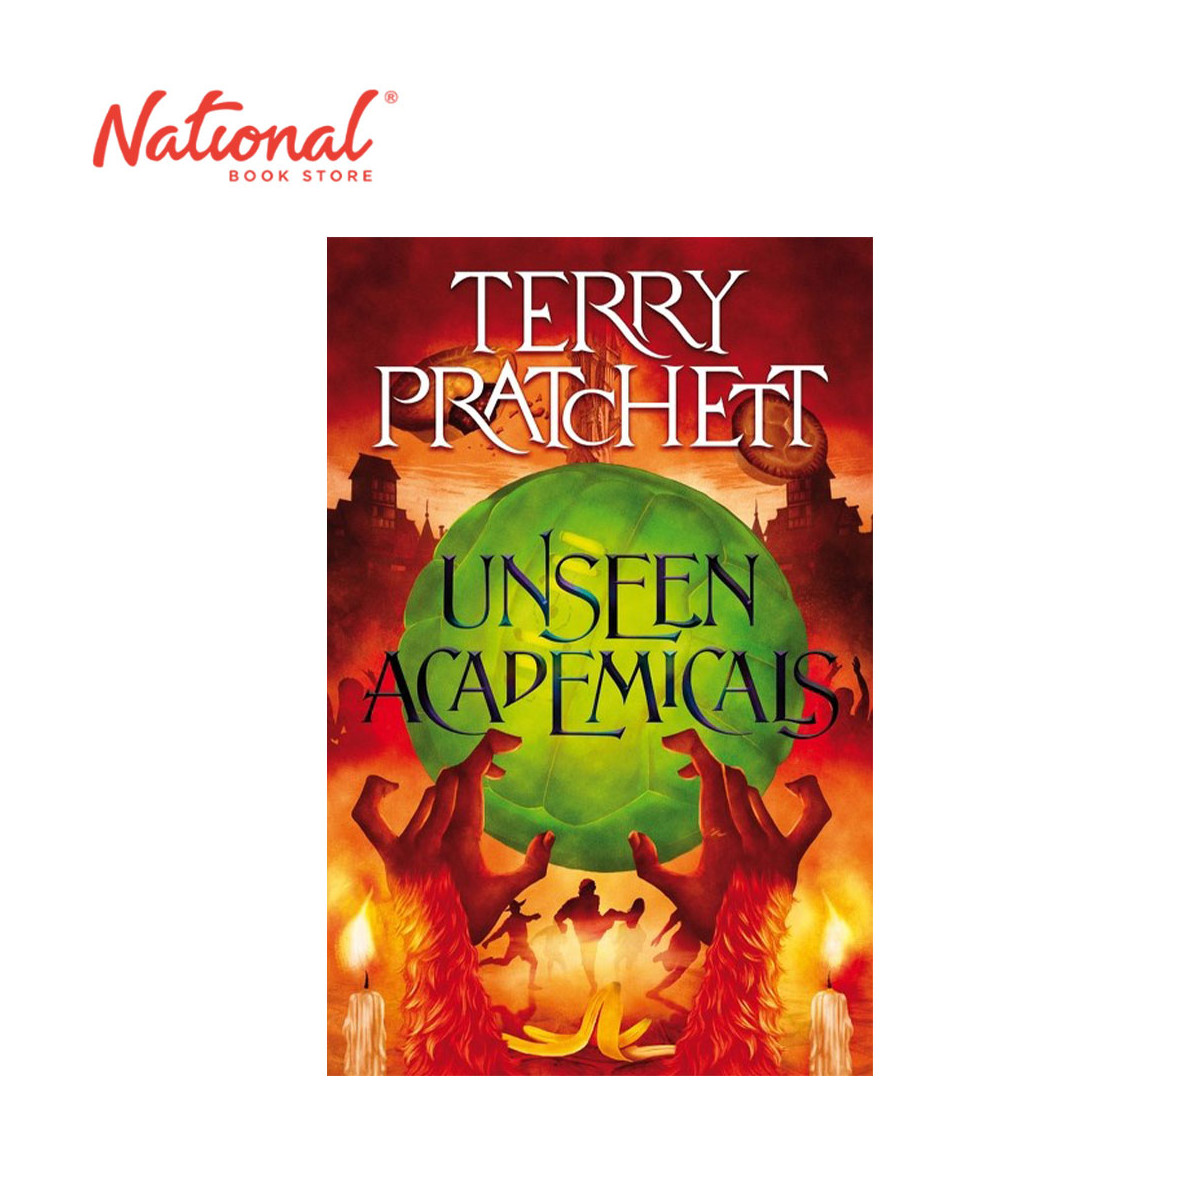 *PRE-ORDER* Unseen Academicals by Terry Pratchett - Trade Paperback - Sci-Fi, Fantasy & Horror